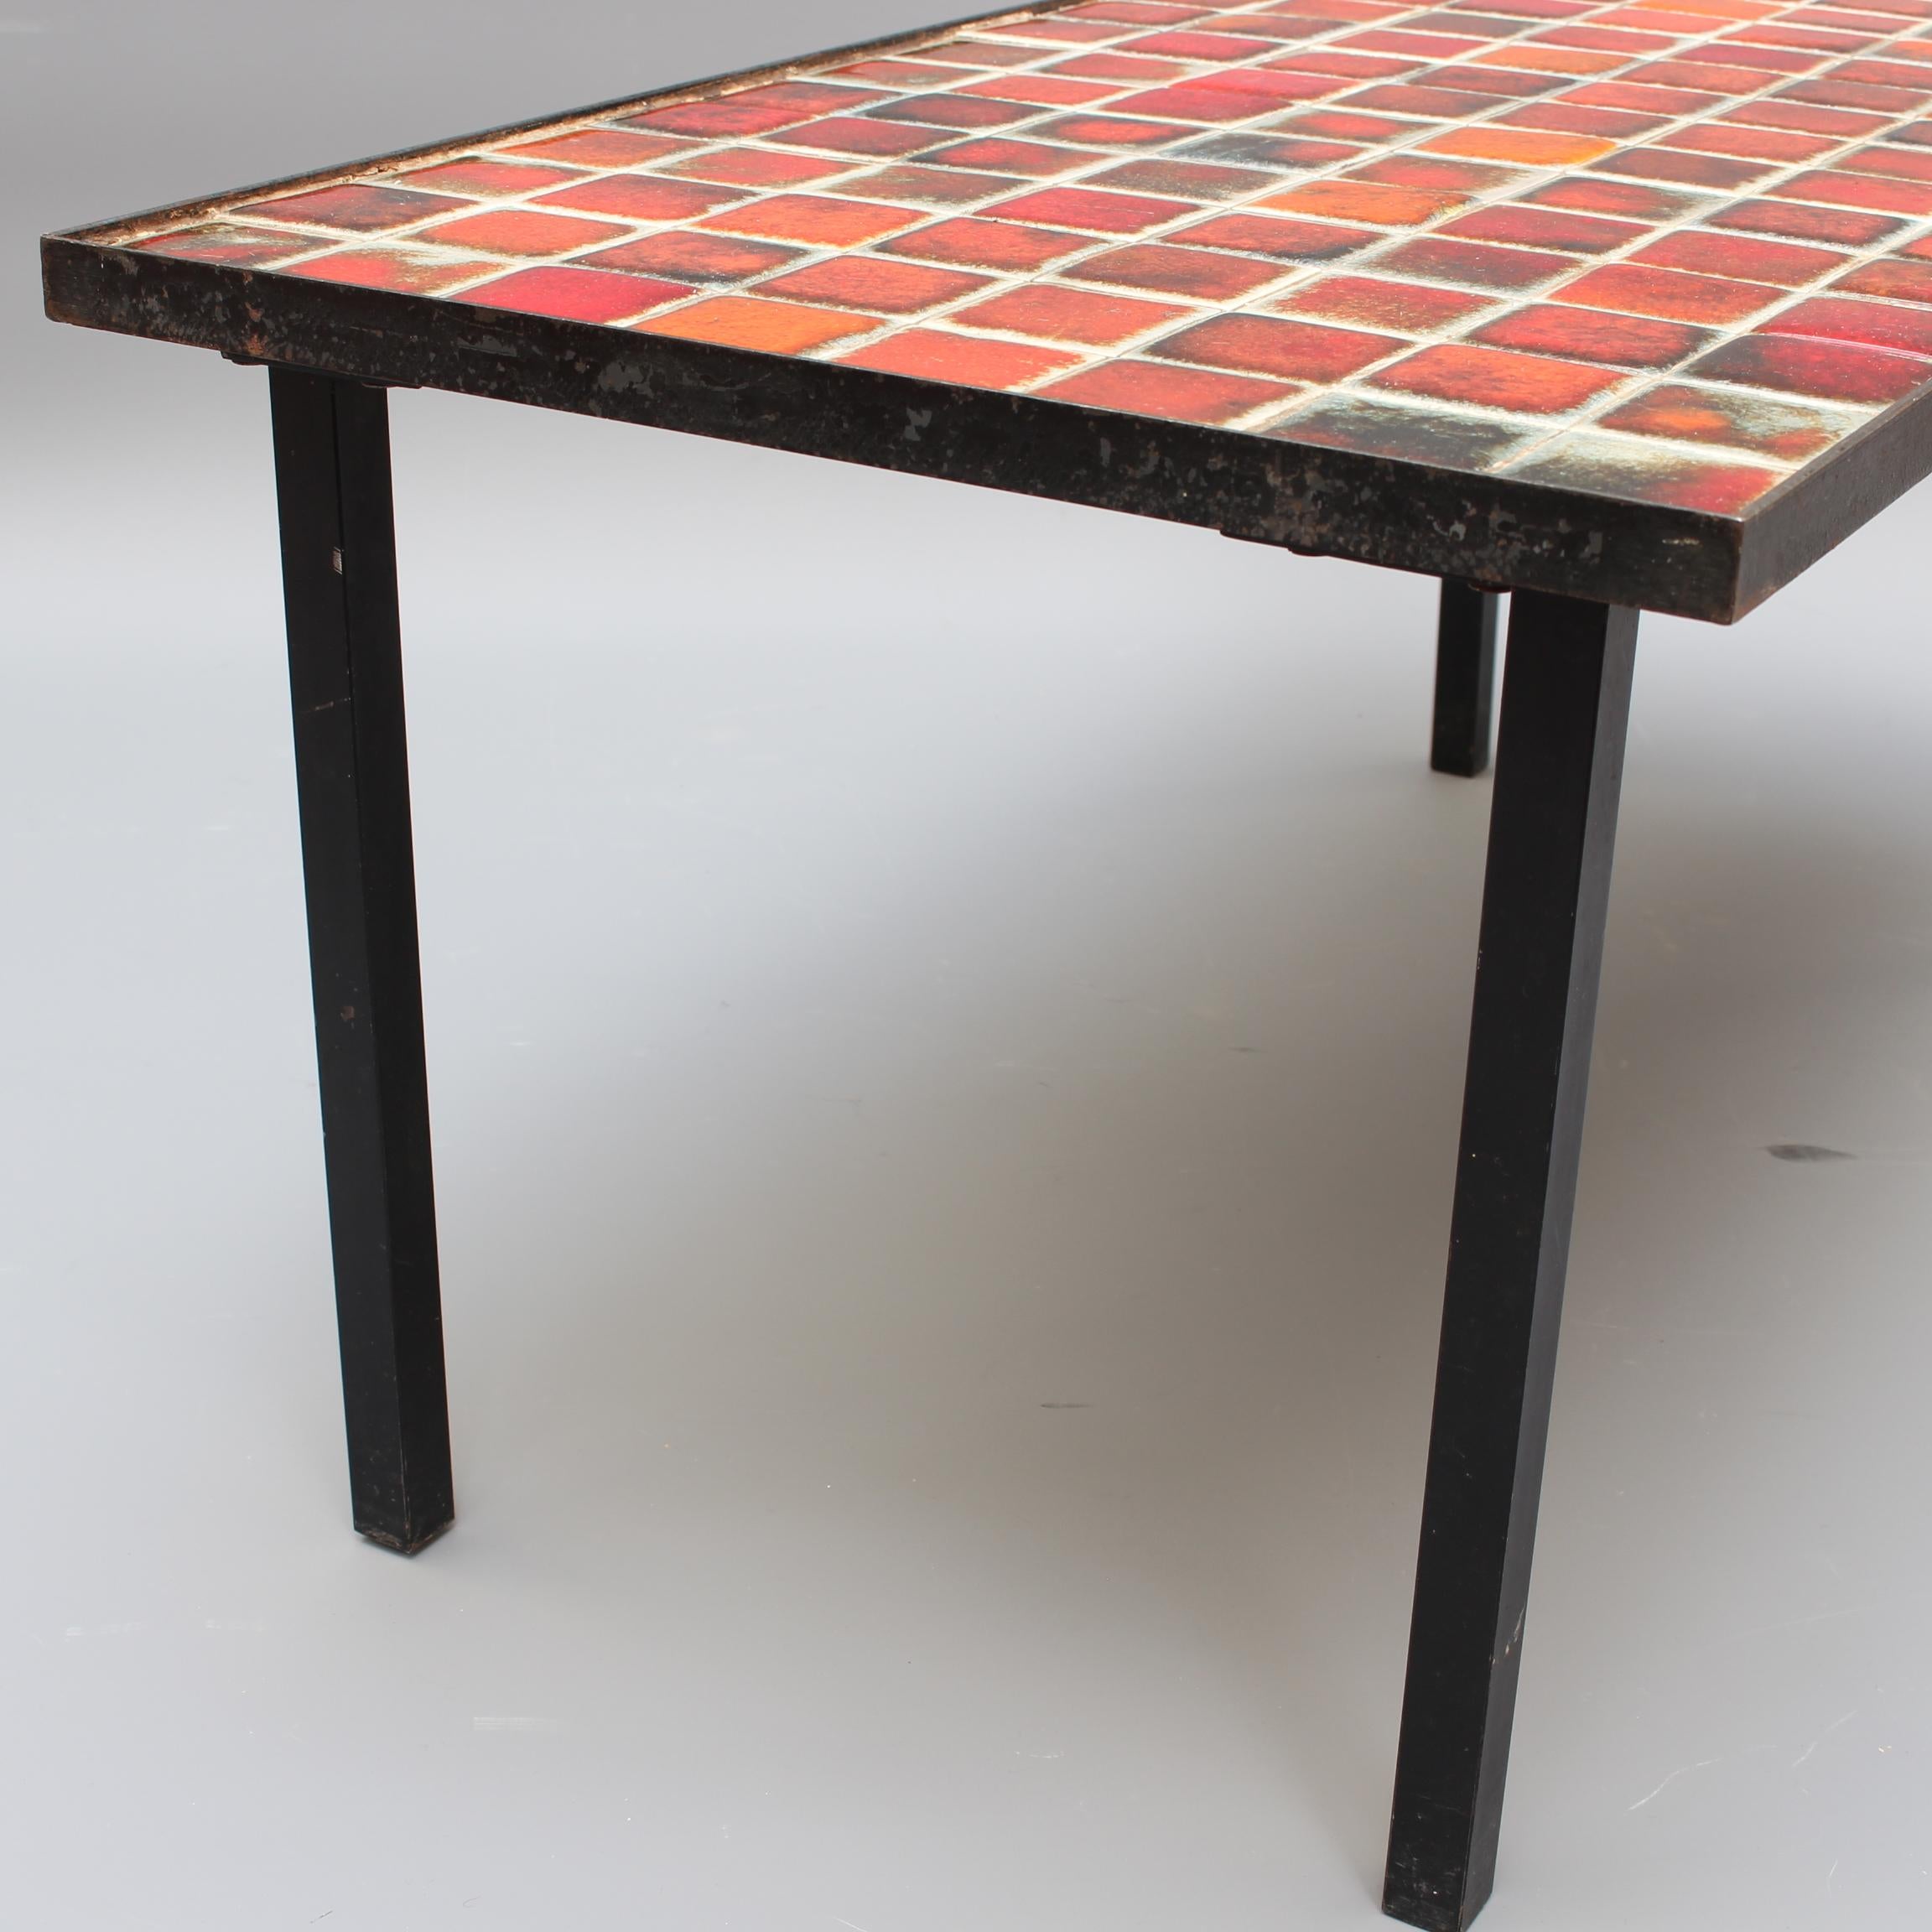 Mid-20th Century Ceramic Low Table with Red-Hued Tiles by Mado Jolain 'circa 1950s'